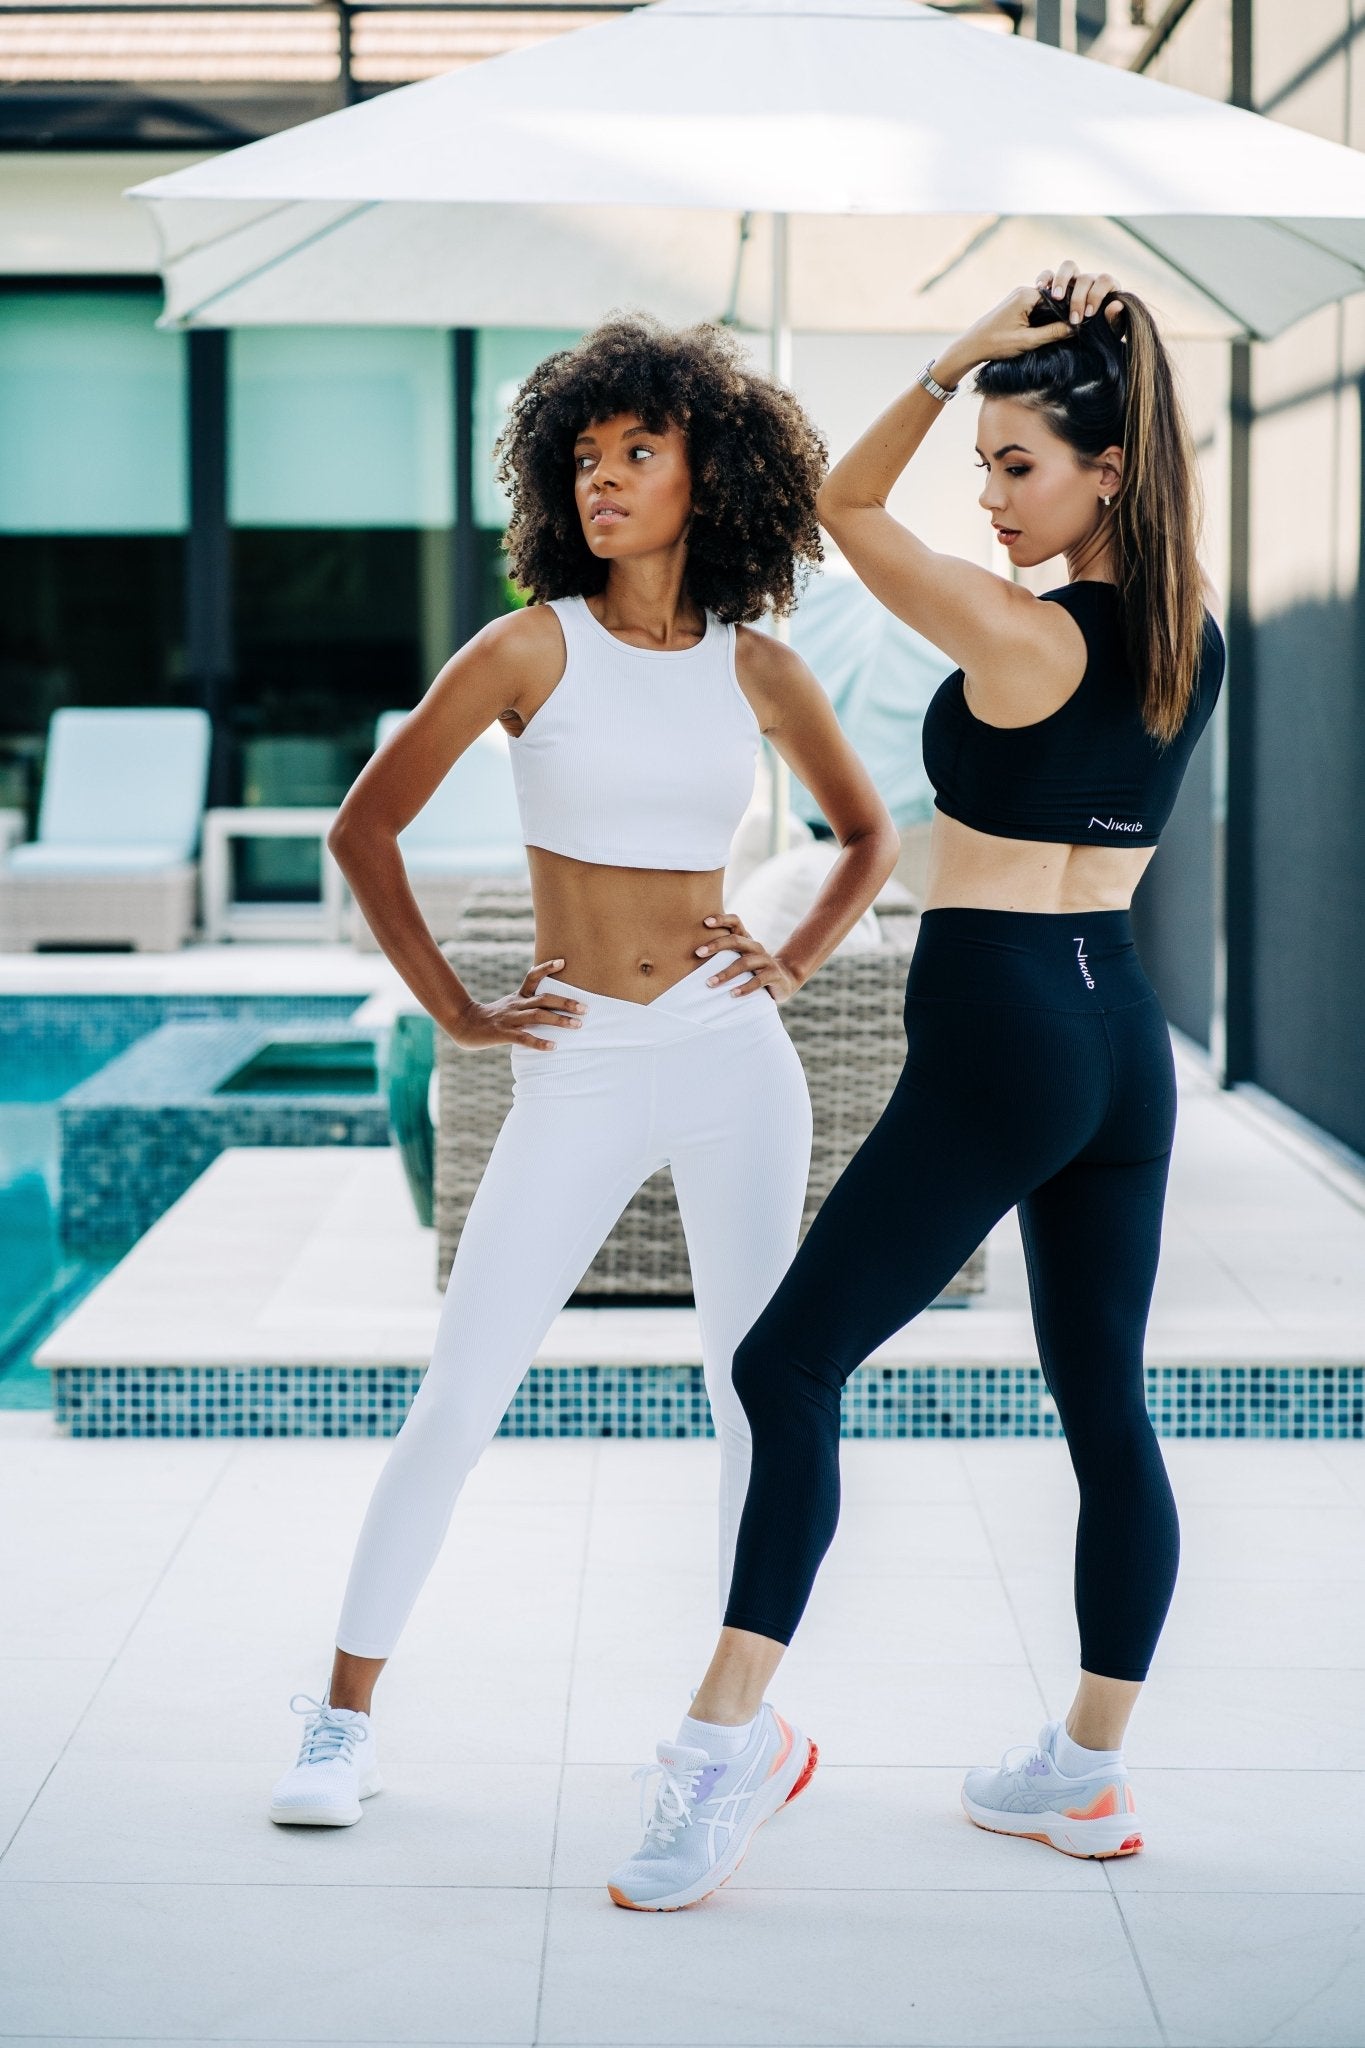 The Best Women's Leggings for Working Out: What to Look for